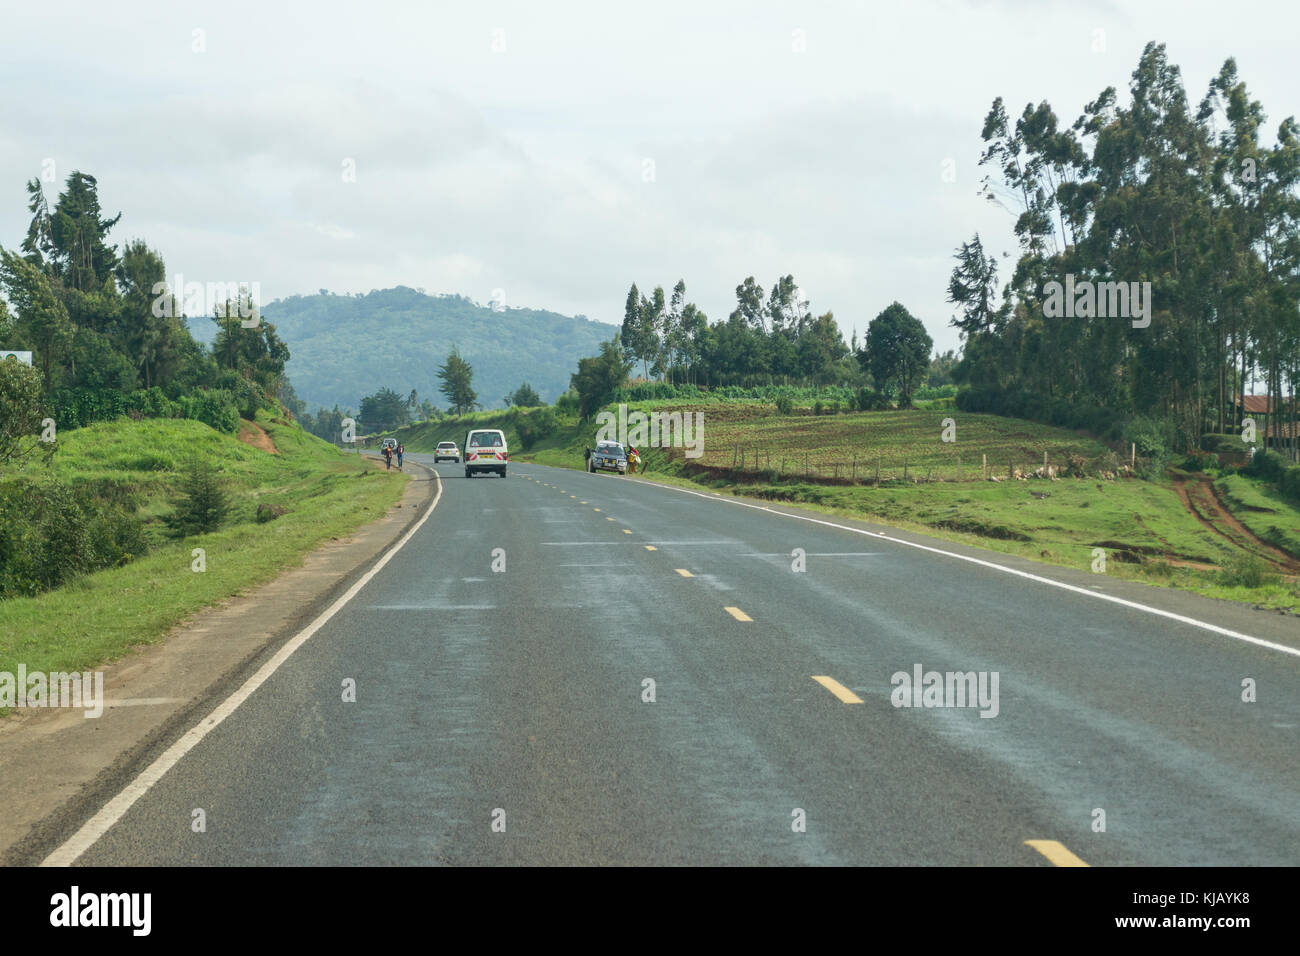 A countryside road with vehicles and people on it, Kenya, East Africa Stock Photo